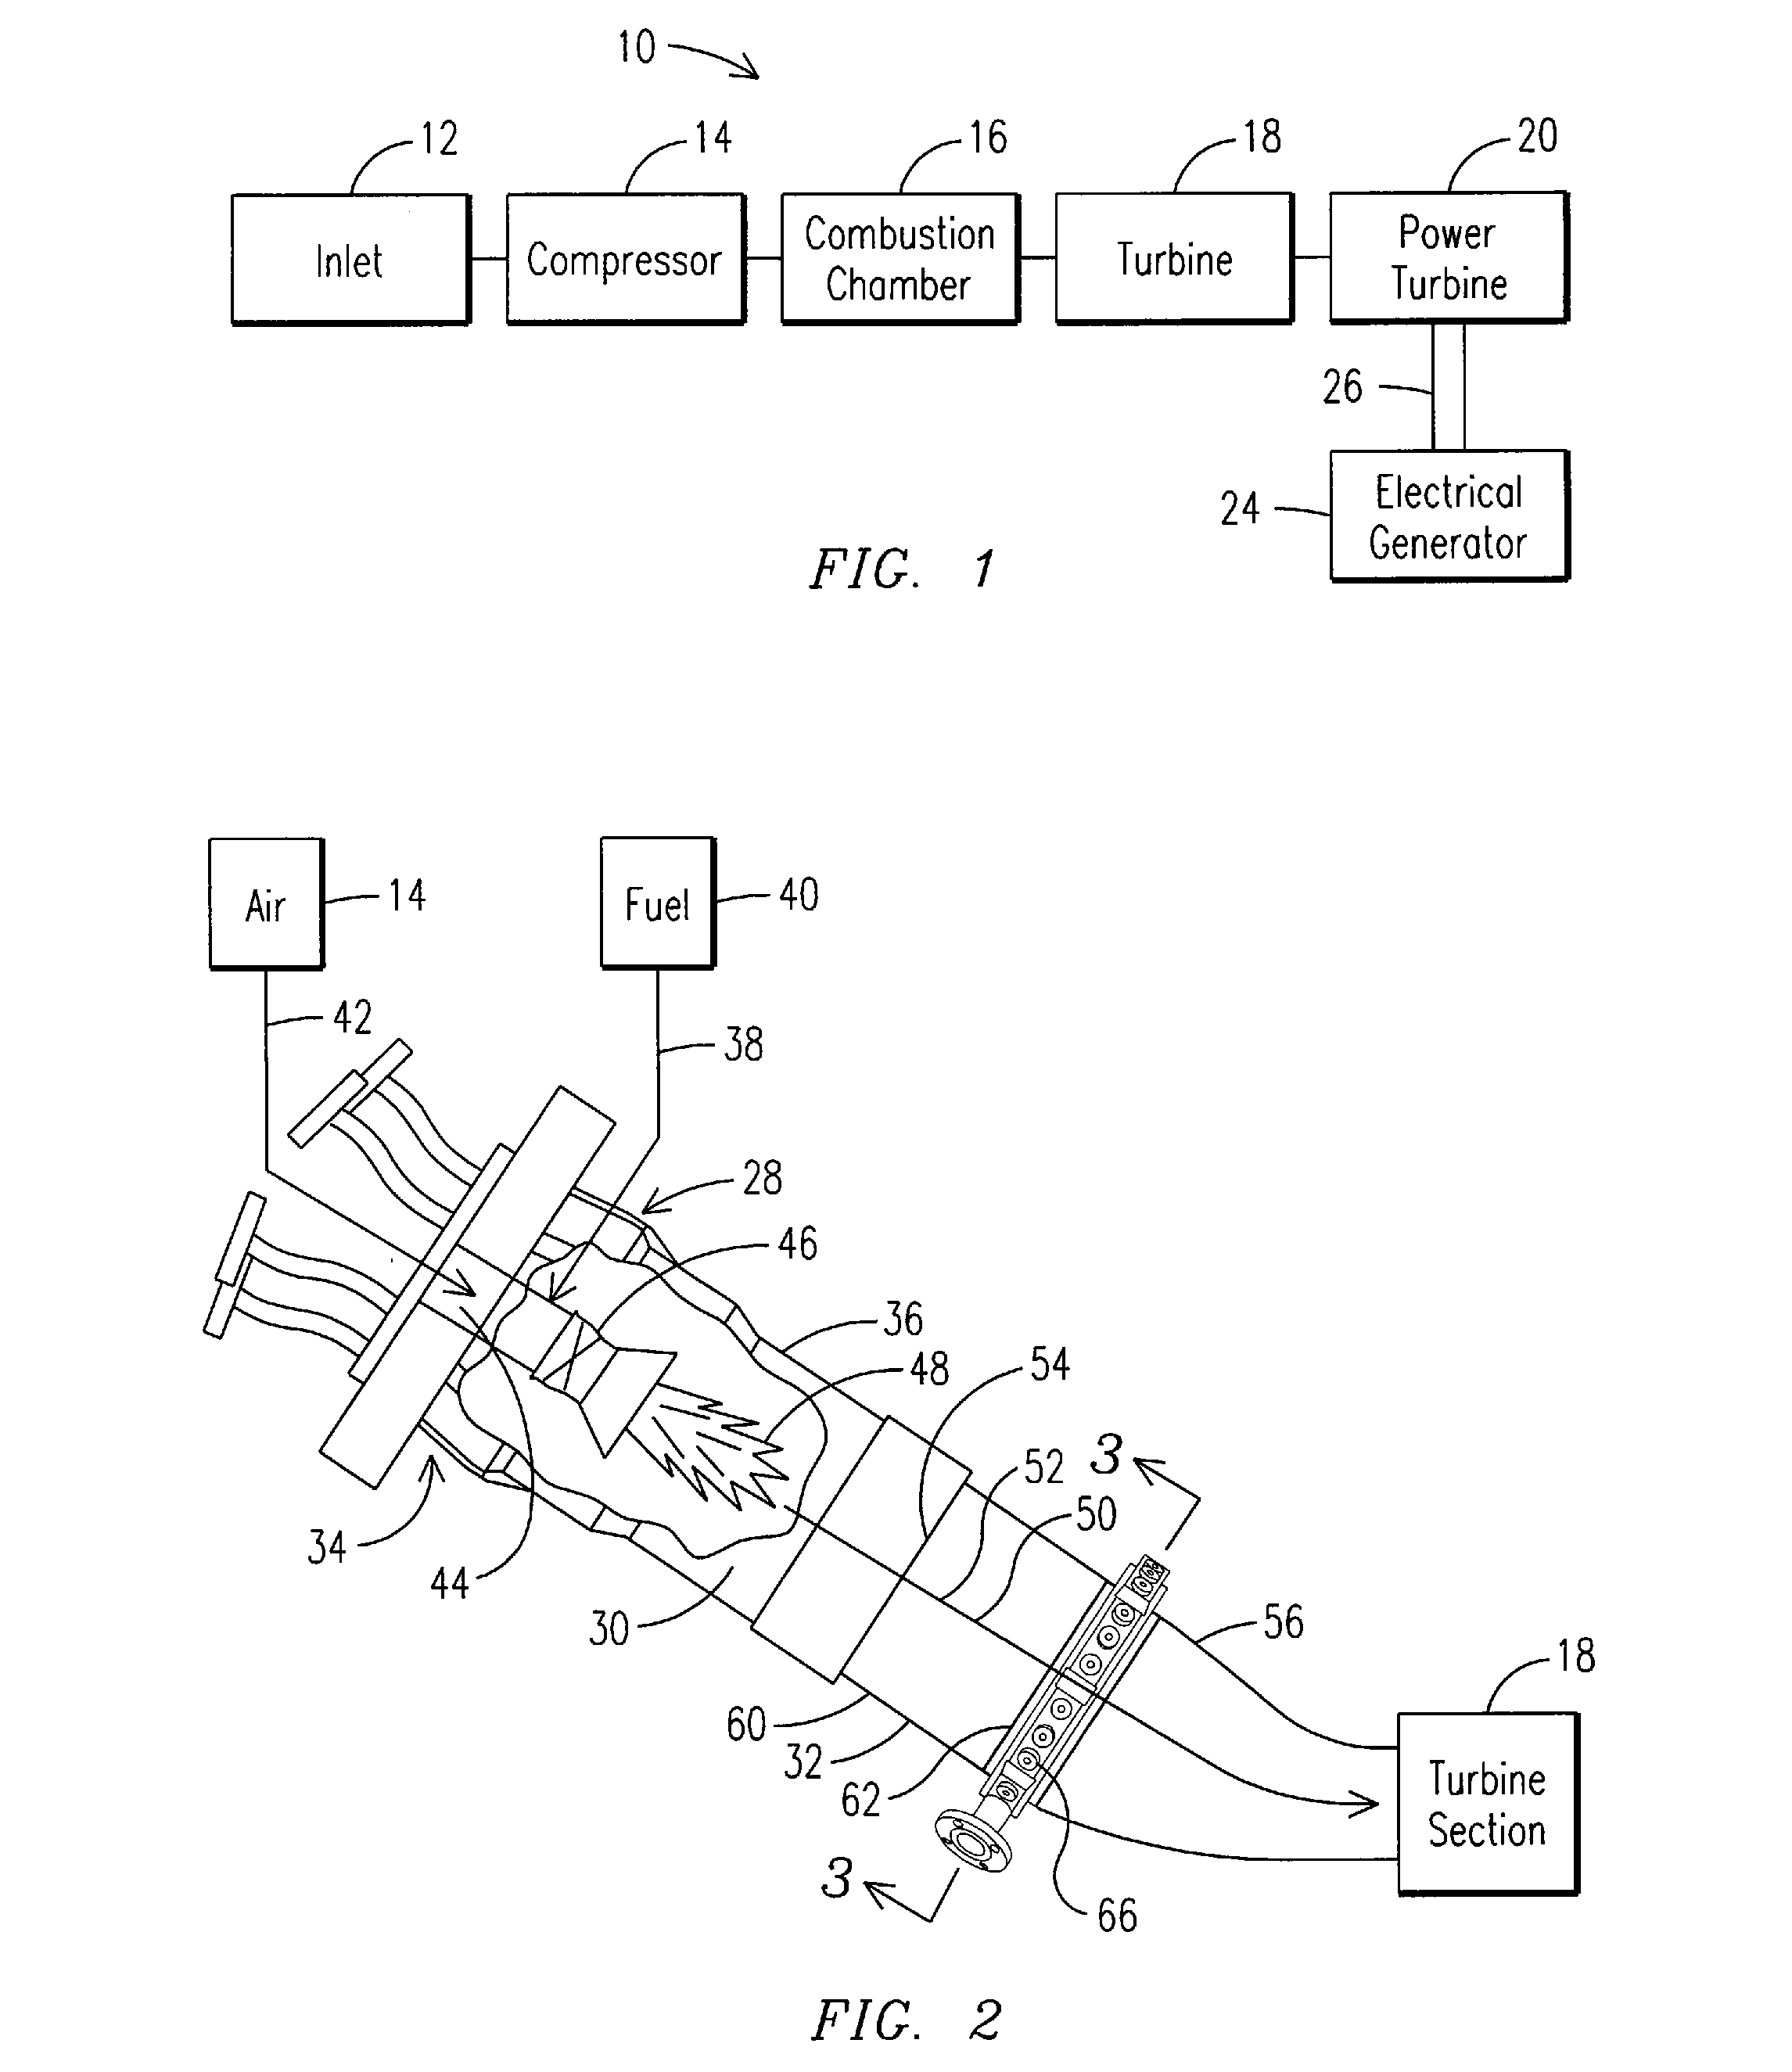 Apparatus and Method for Controlling the Secondary Injection of Fuel